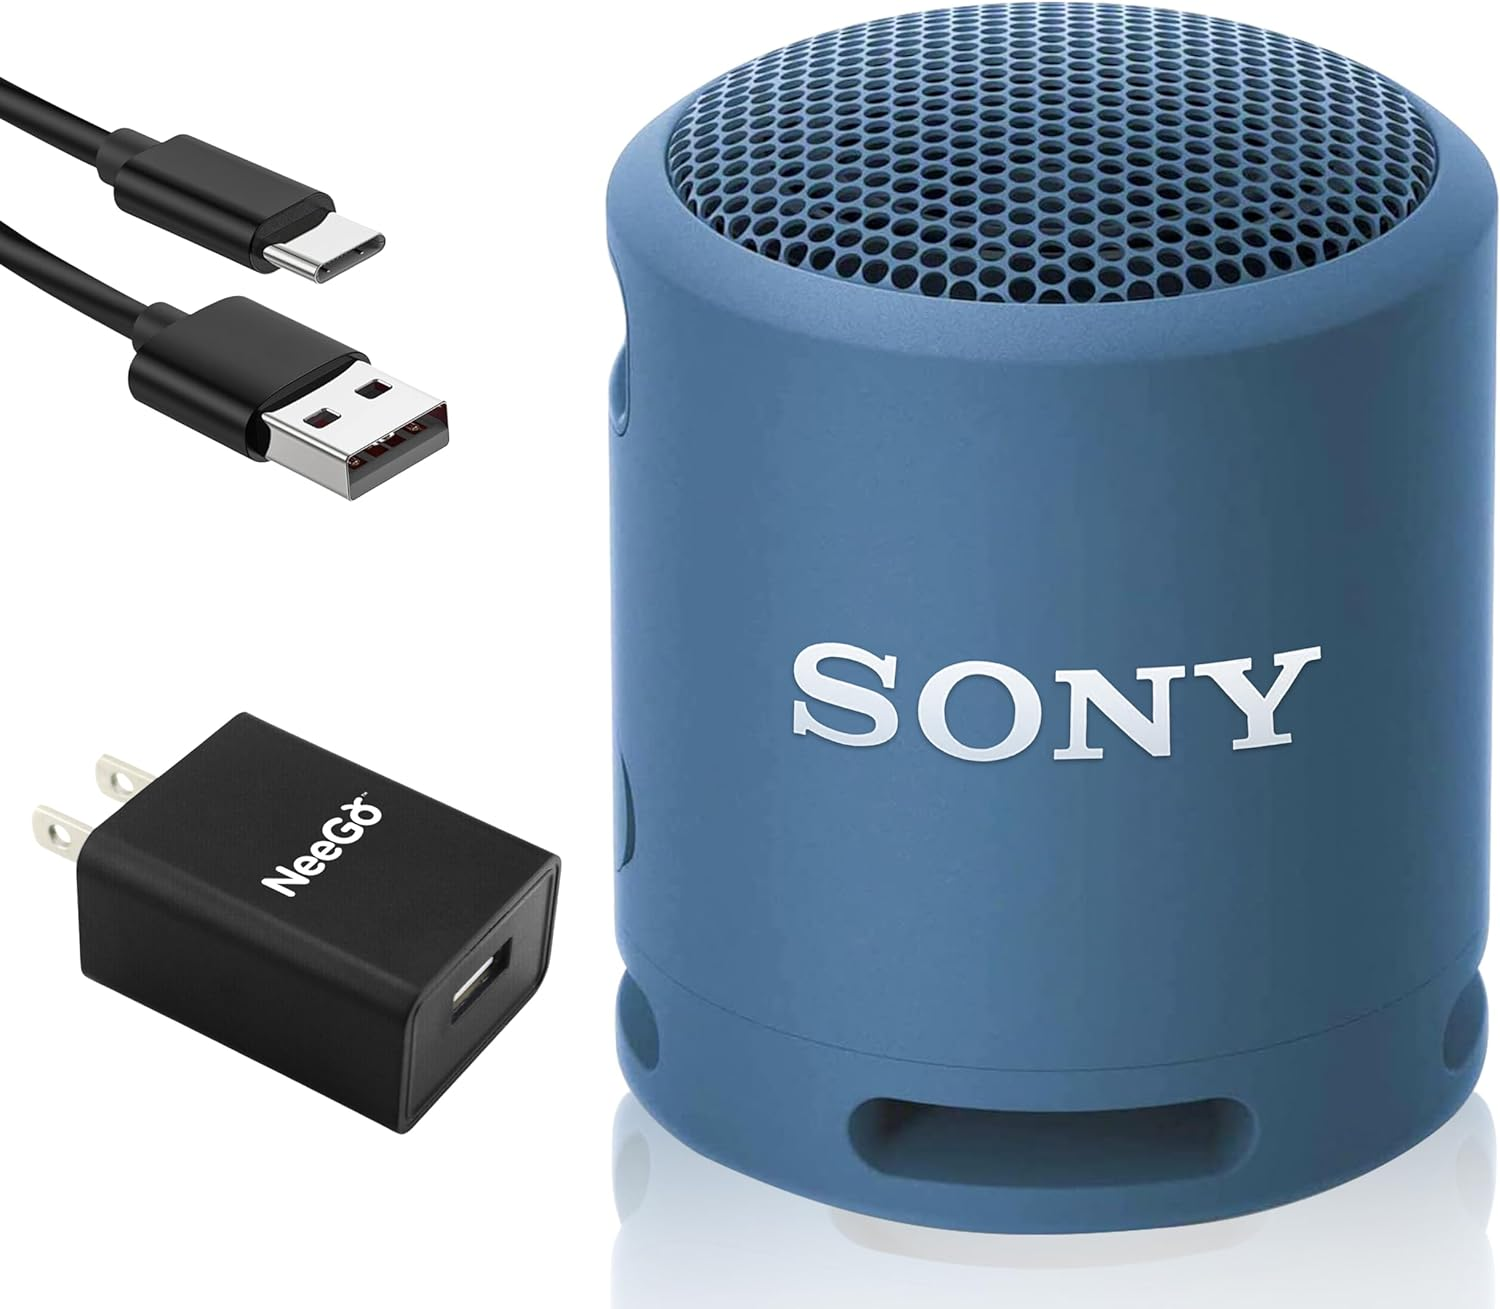 
Sony Bluetooth Speaker, Portable Speakers Bluetooth Wireless, Extra BASS IP67 Waterproof & Durable for Outdoor.